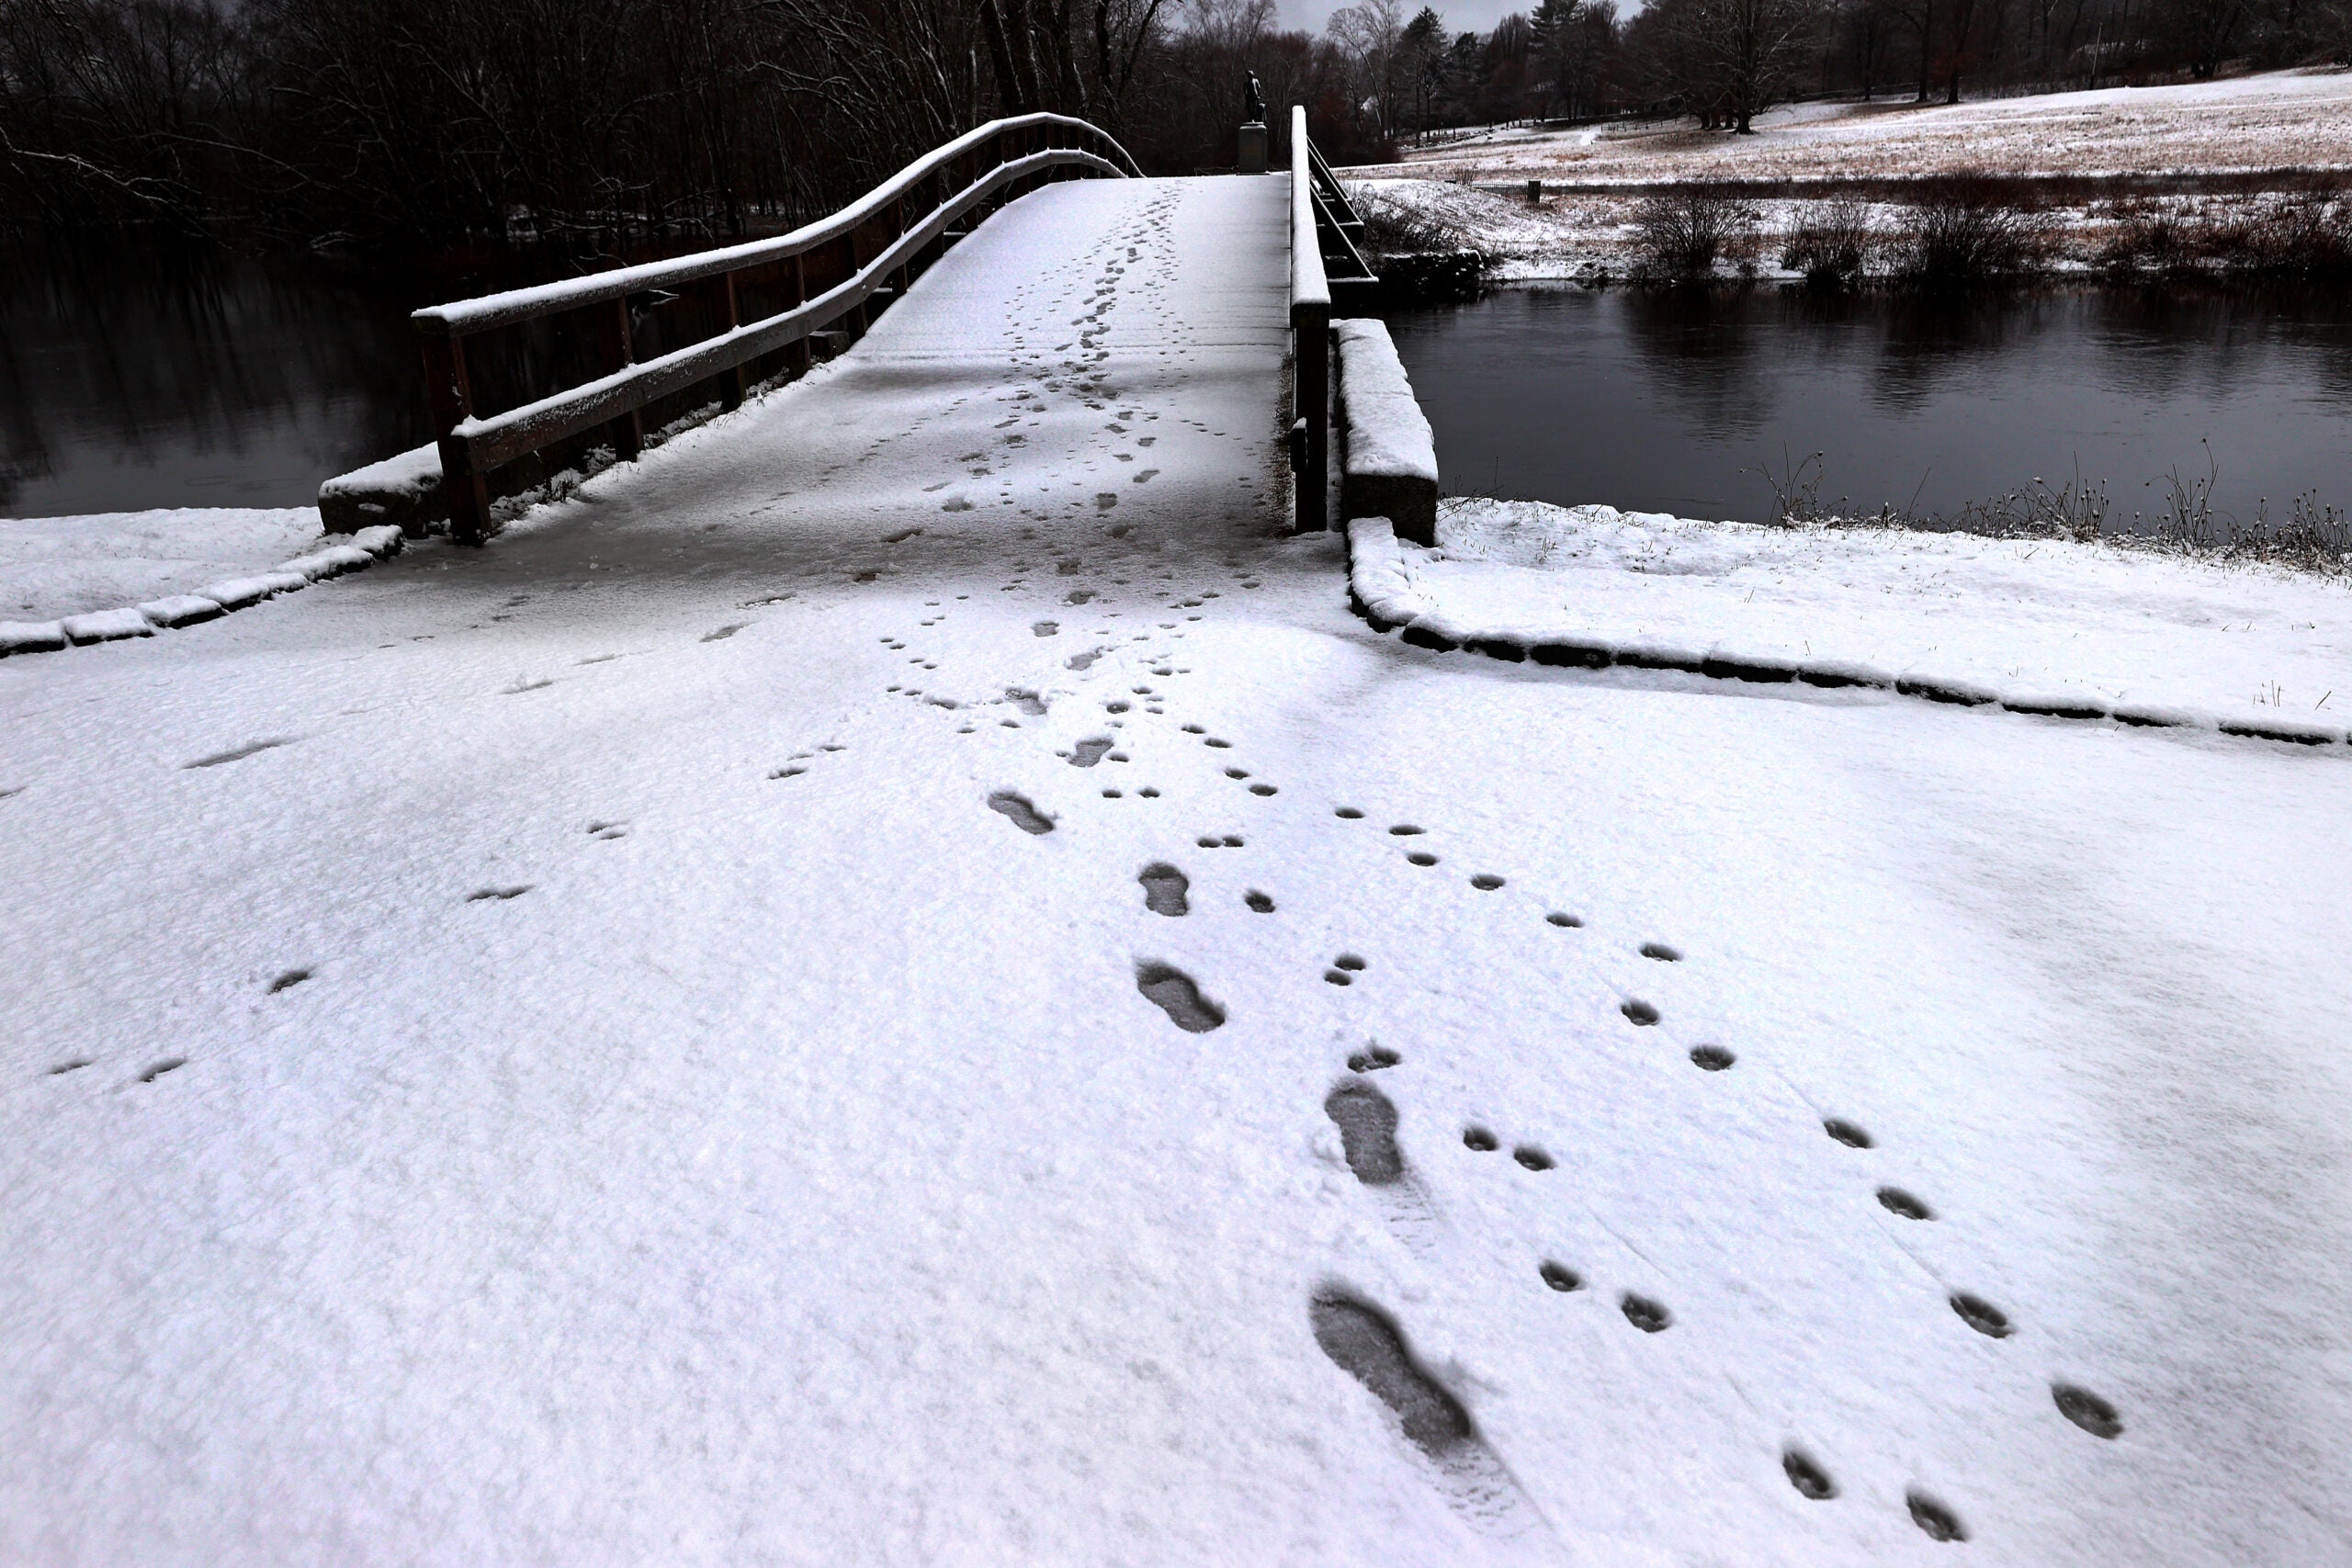 Footprints in the snow by Concord's North Bridge on Friday morning.